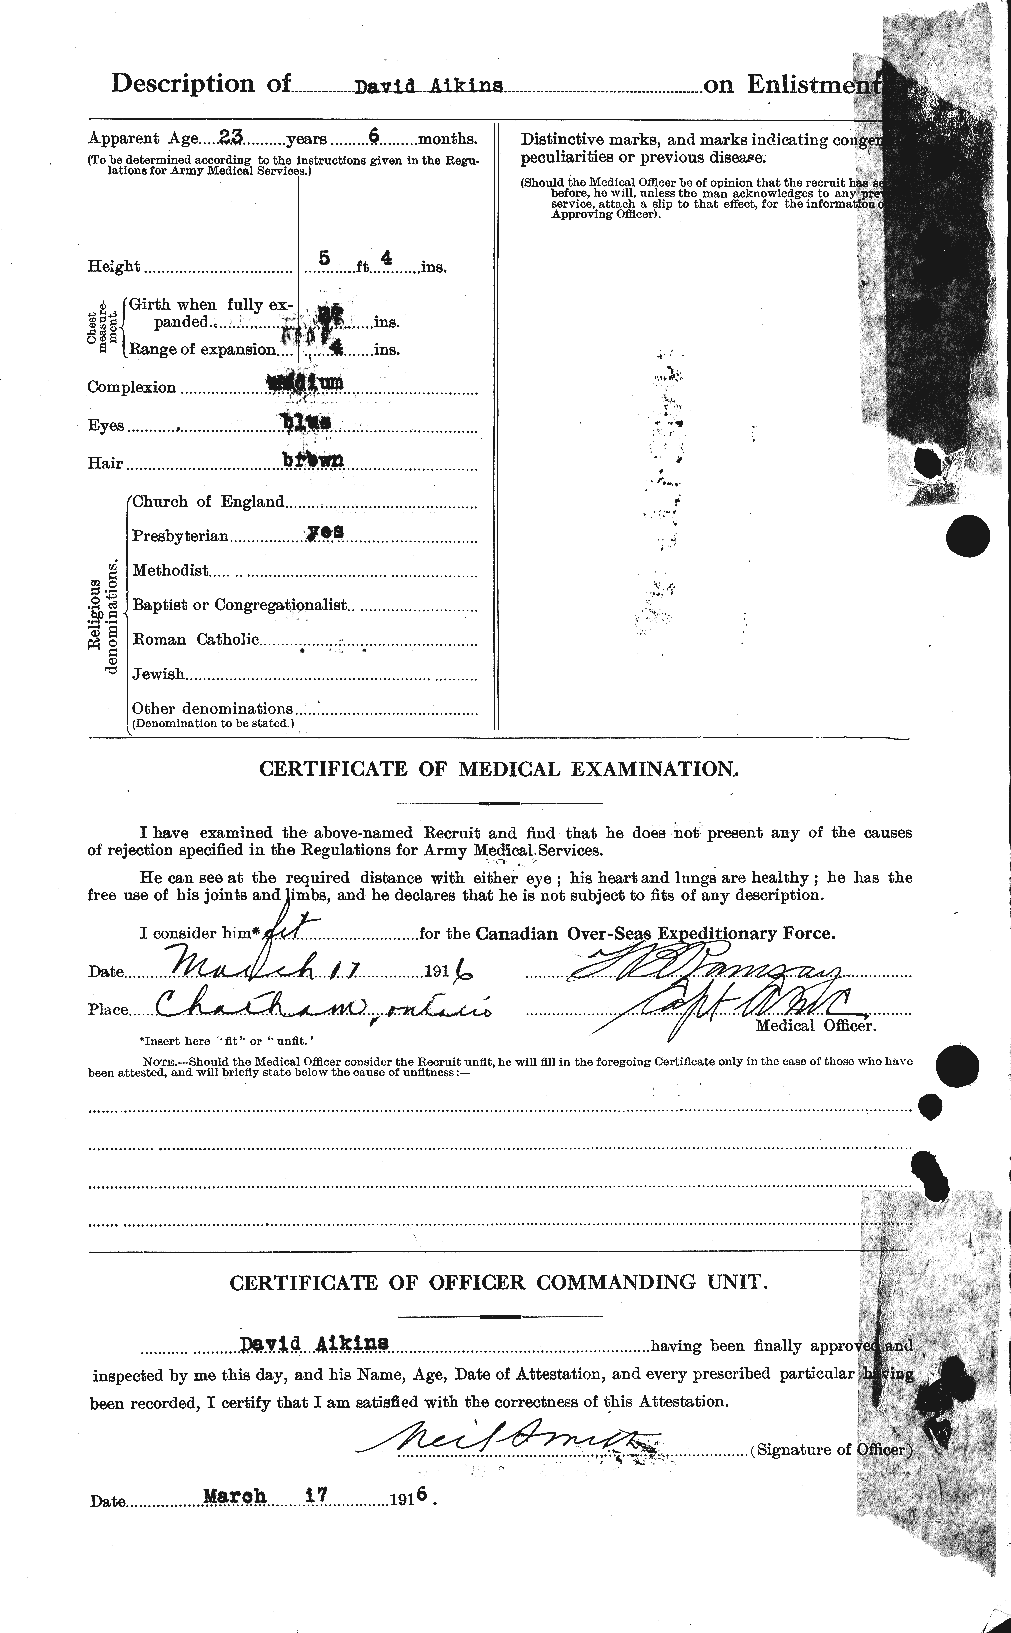 Personnel Records of the First World War - CEF 204172b